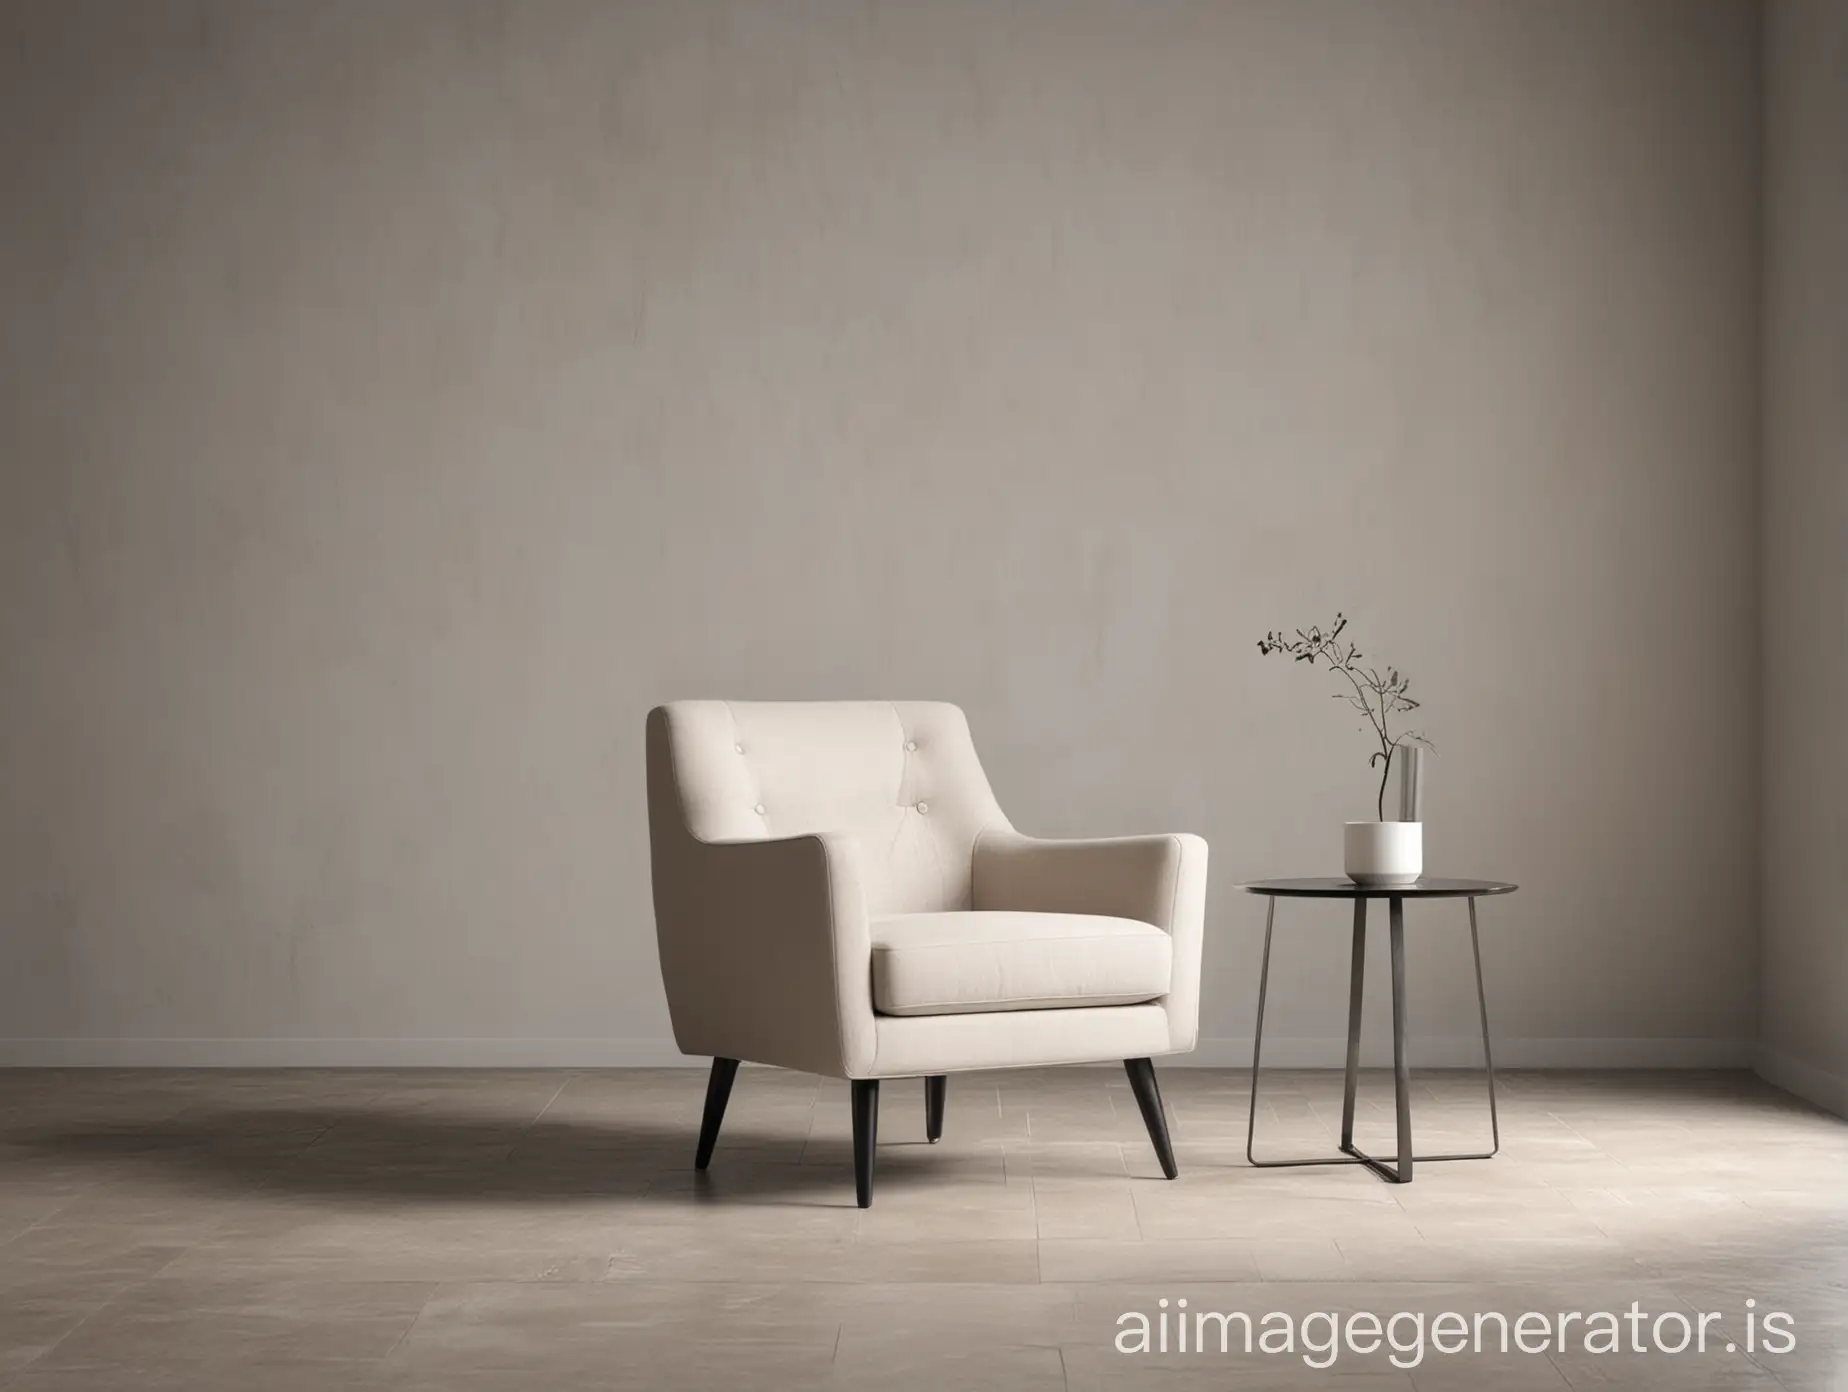 empty room with modern arm chair, minimalistic, aesthetic